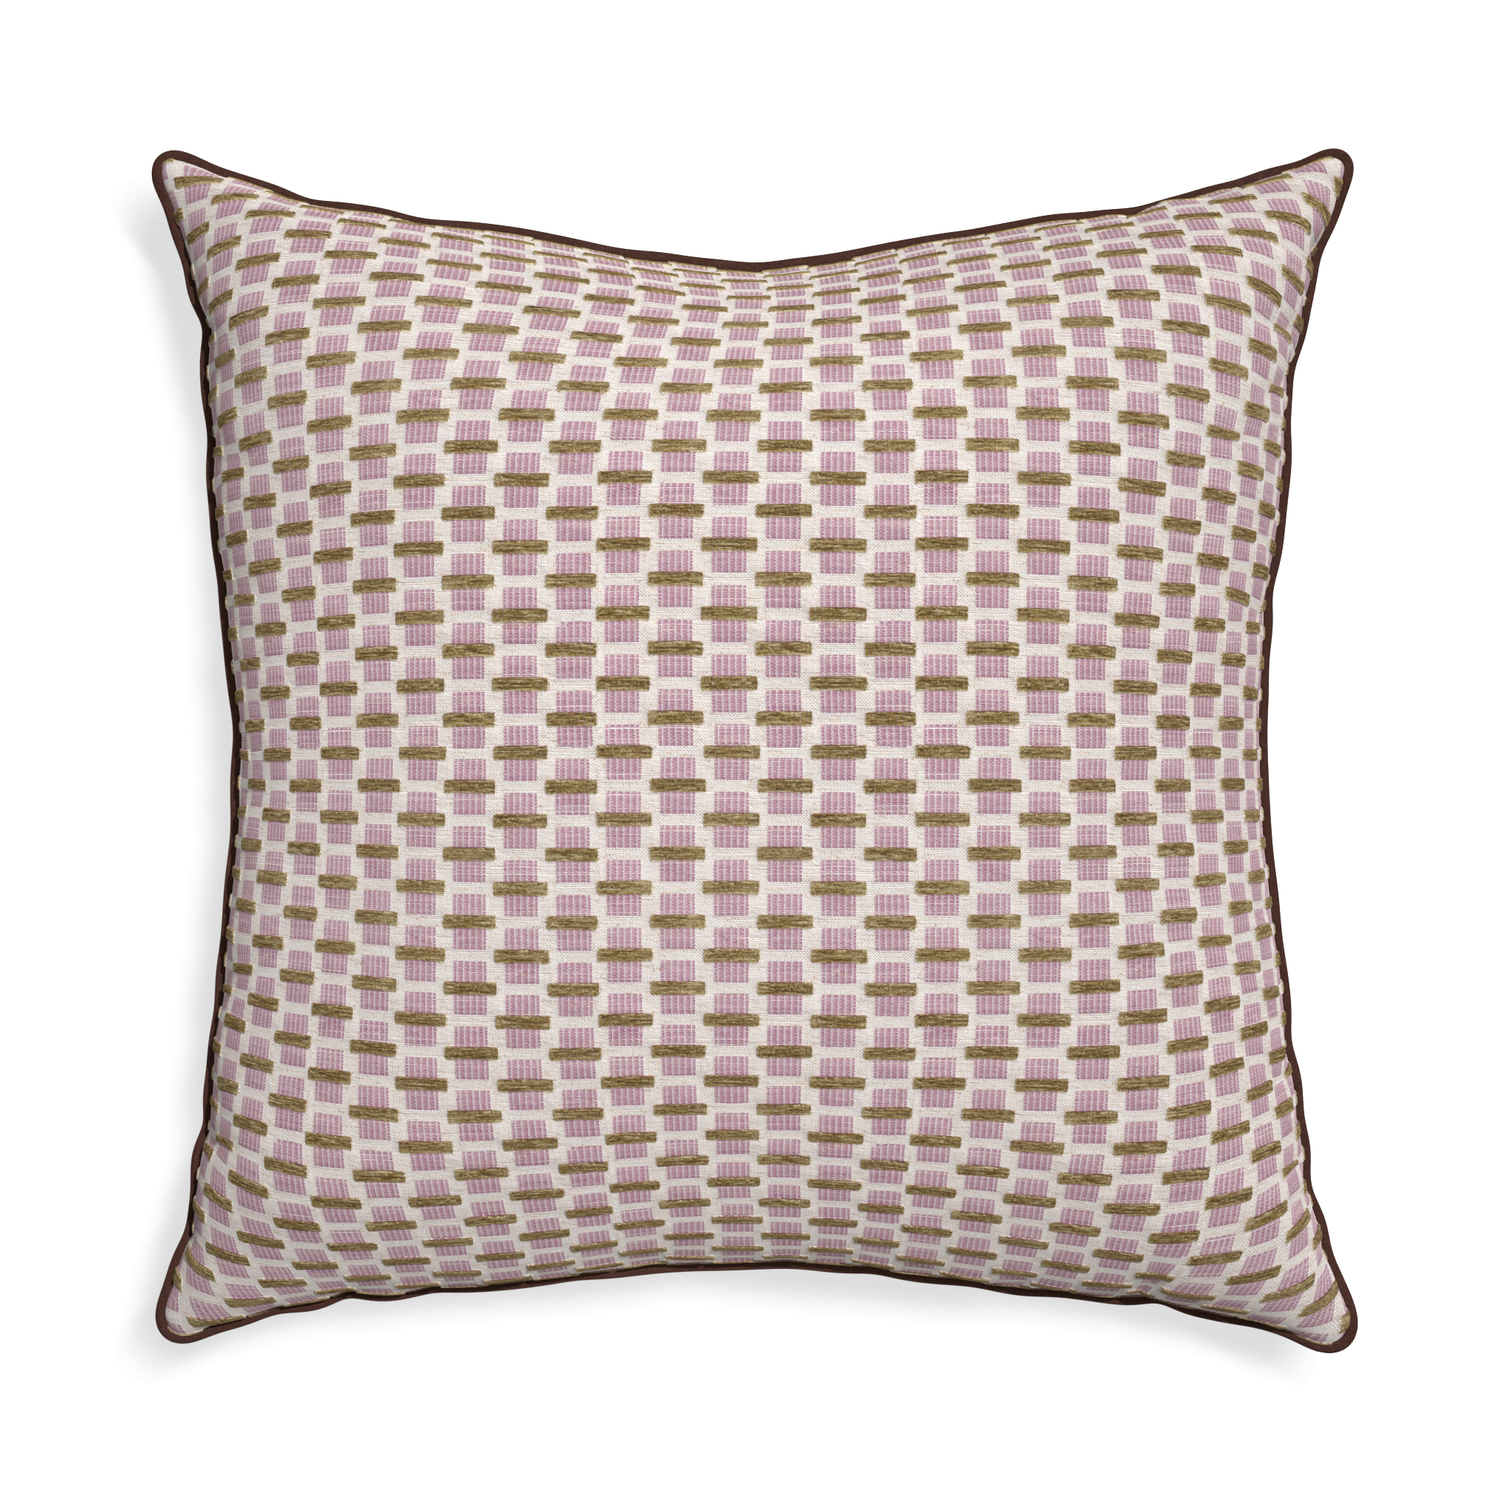 Euro-sham willow orchid custom pink geometric chenillepillow with w piping on white background